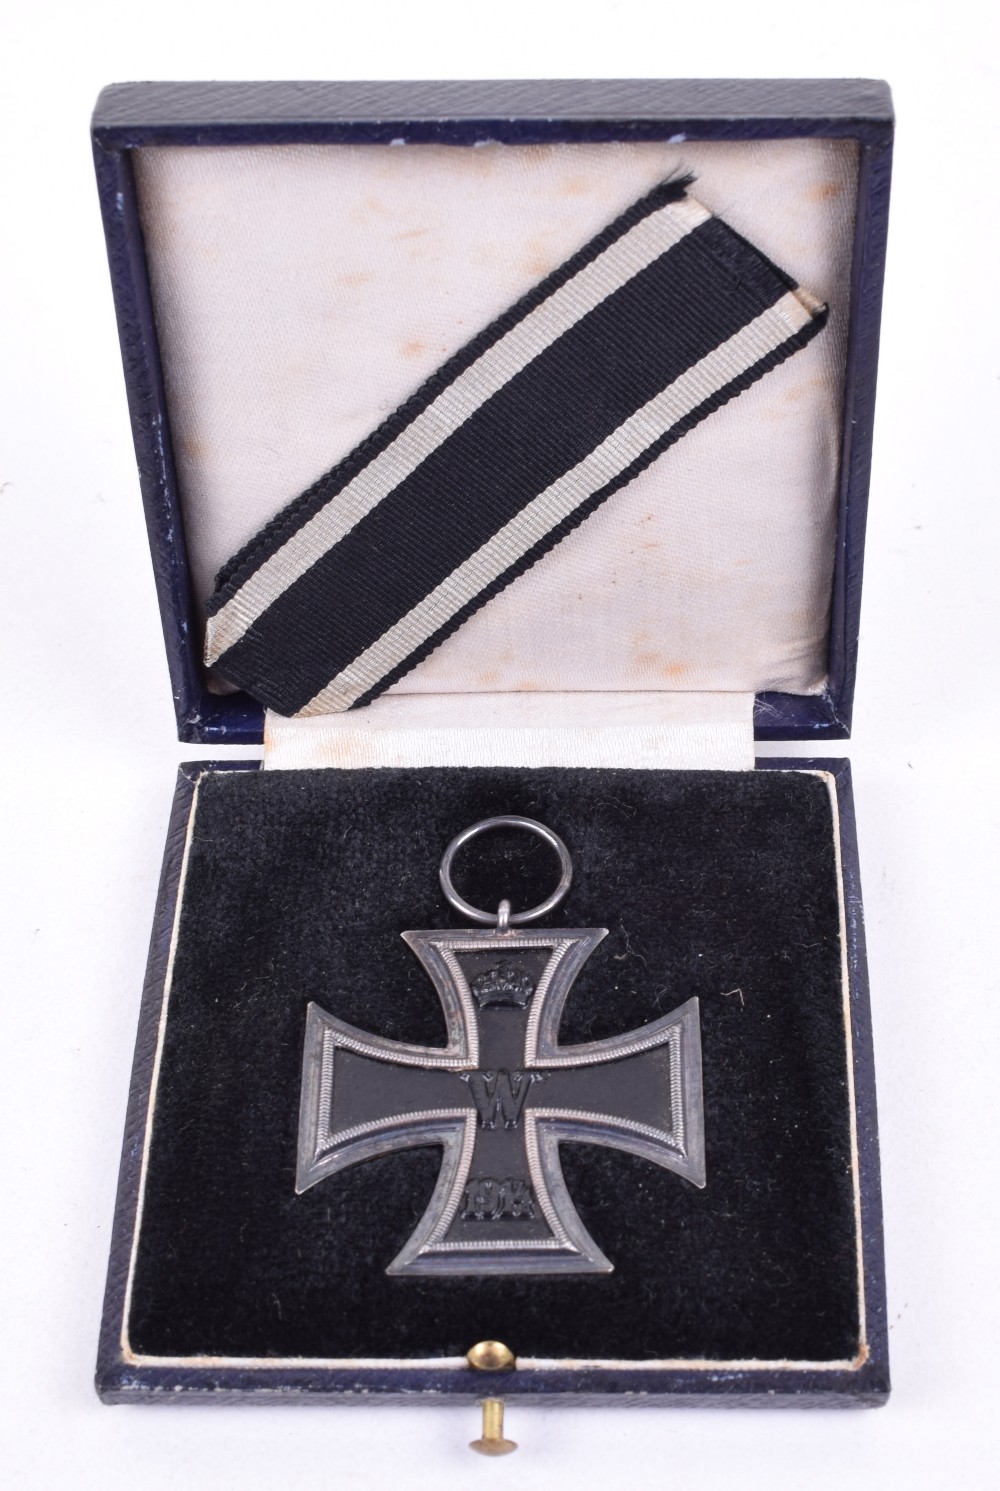 Privately Purchased Iron Cross 2nd Class - Image 2 of 3